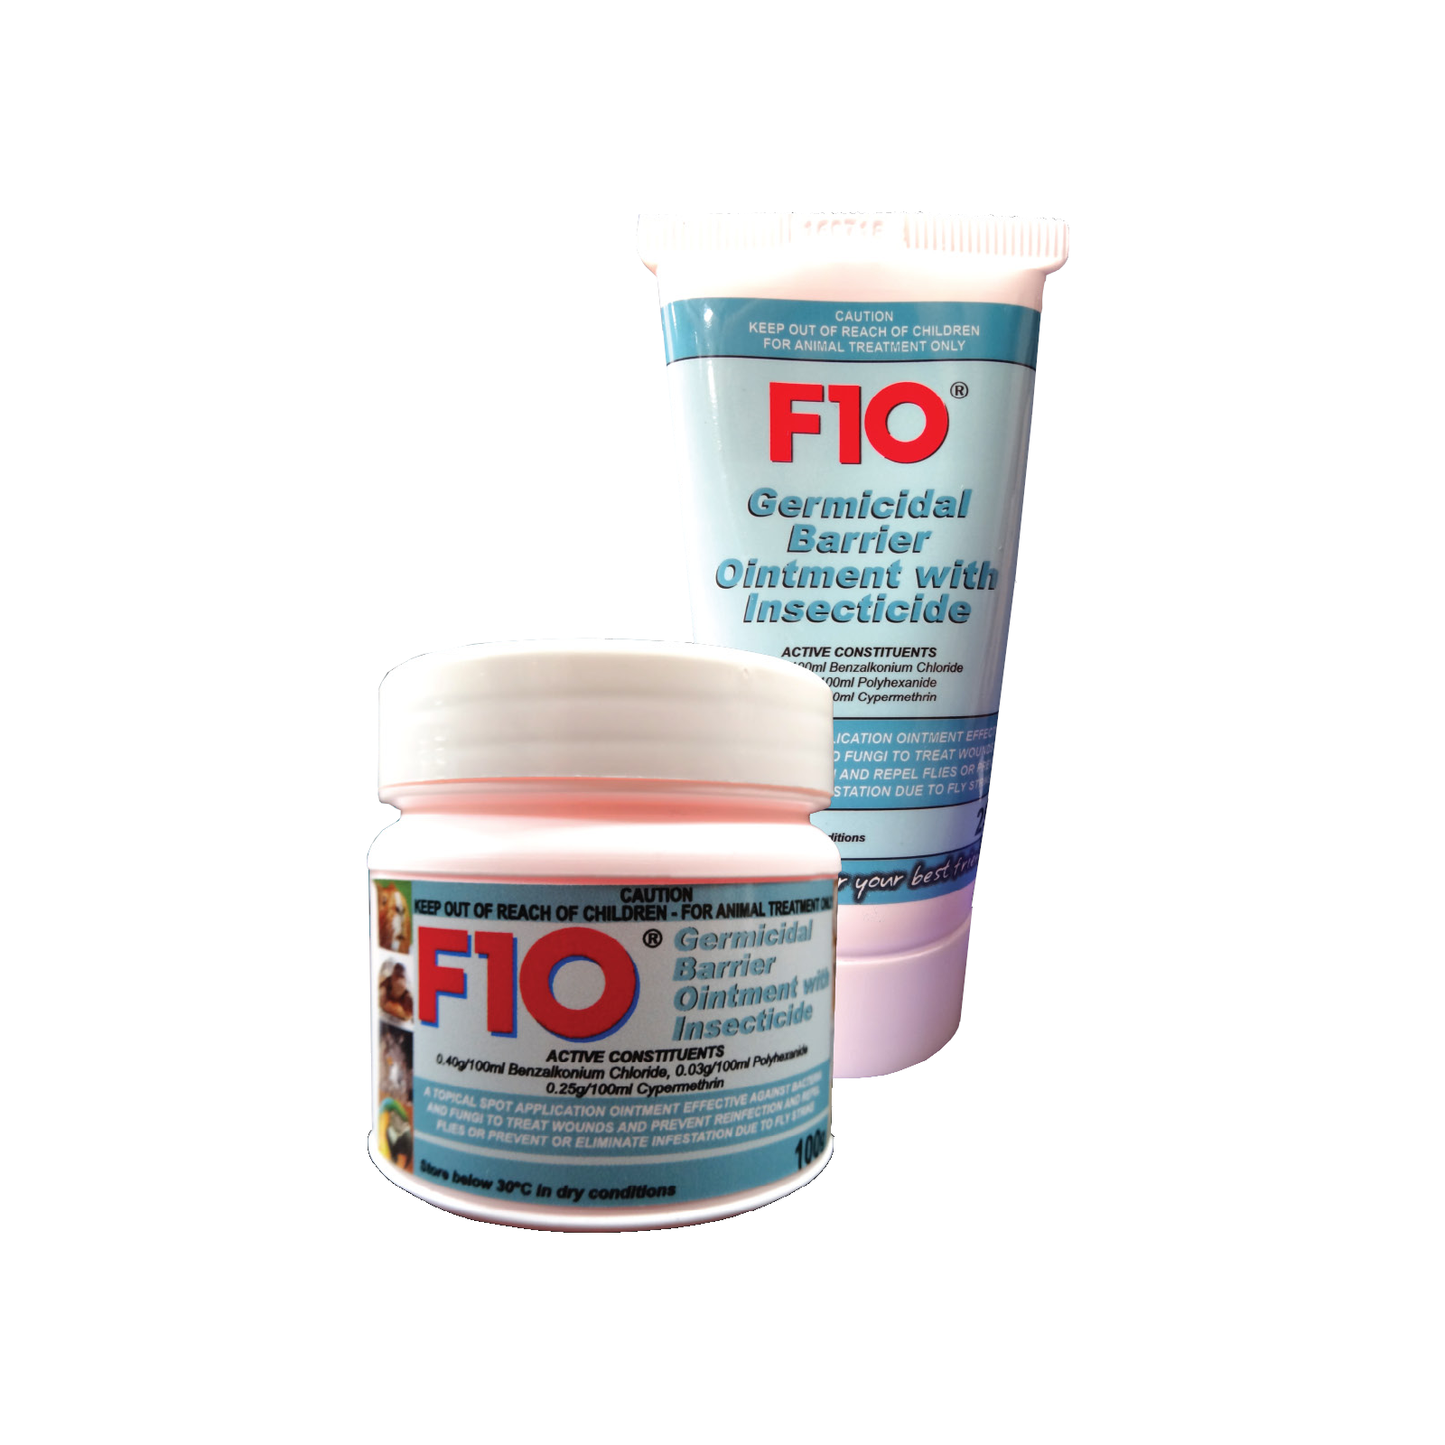 A 100g tub and 25g tube of F10 Germidical Barrier Ointment with Insecticide